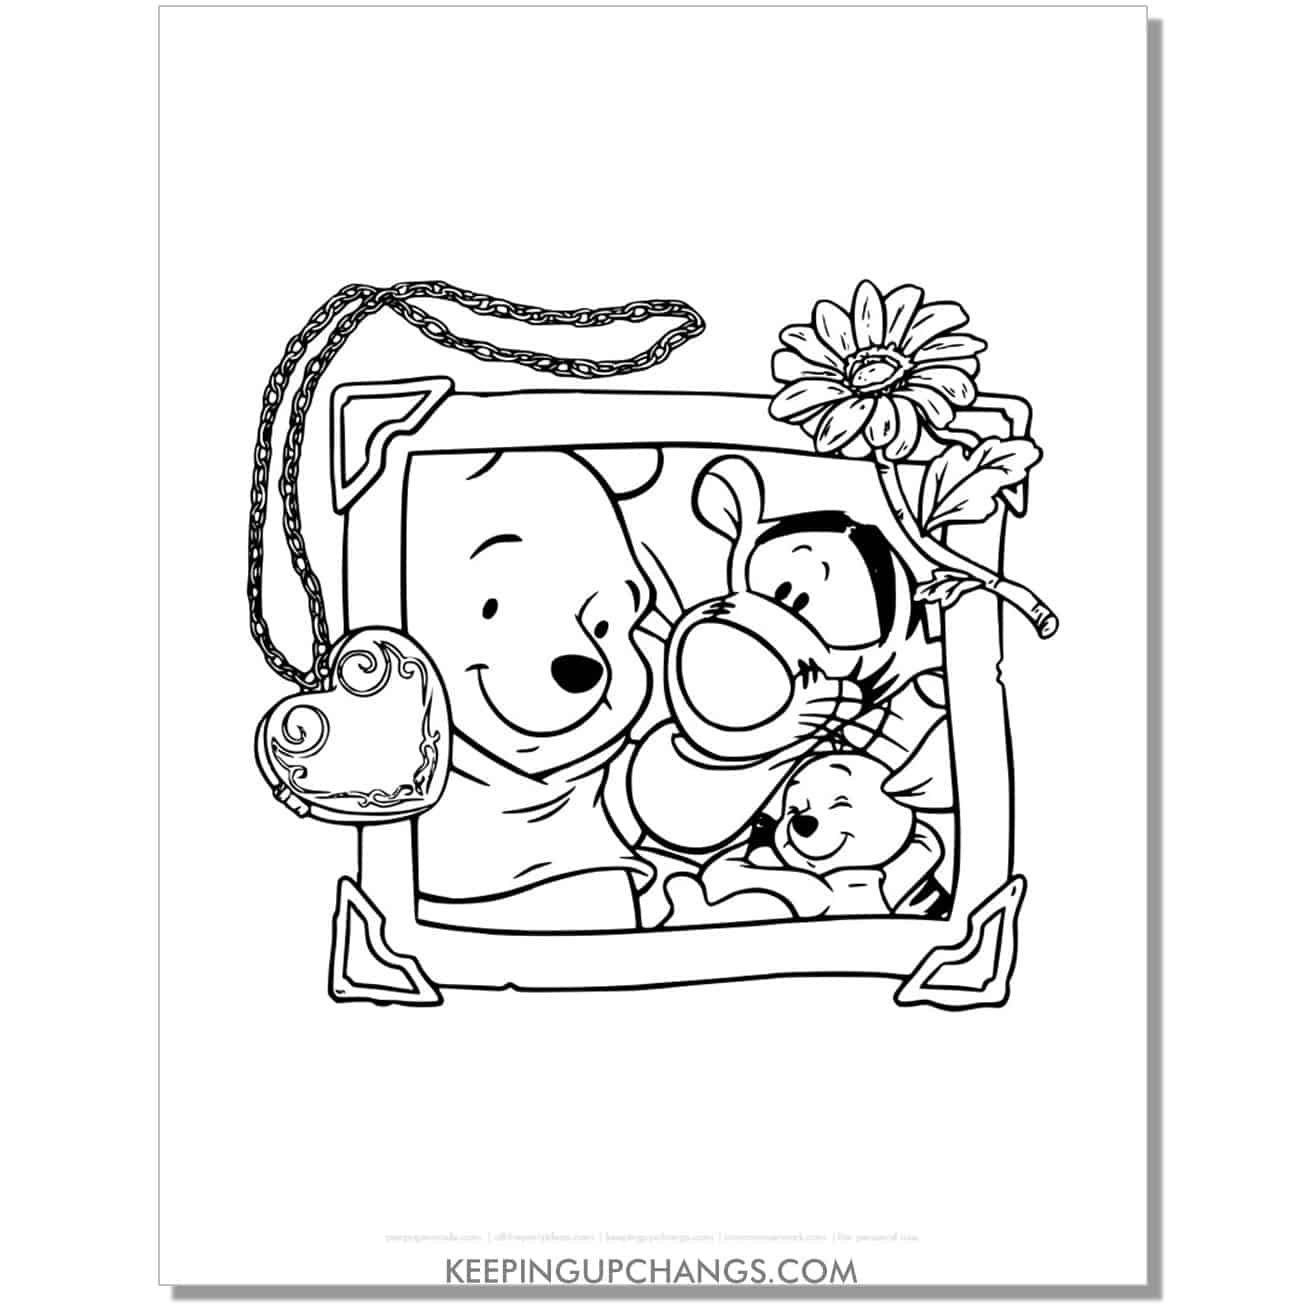 photo frame with tigger, winnie the pooh, and roo coloring page, sheet.